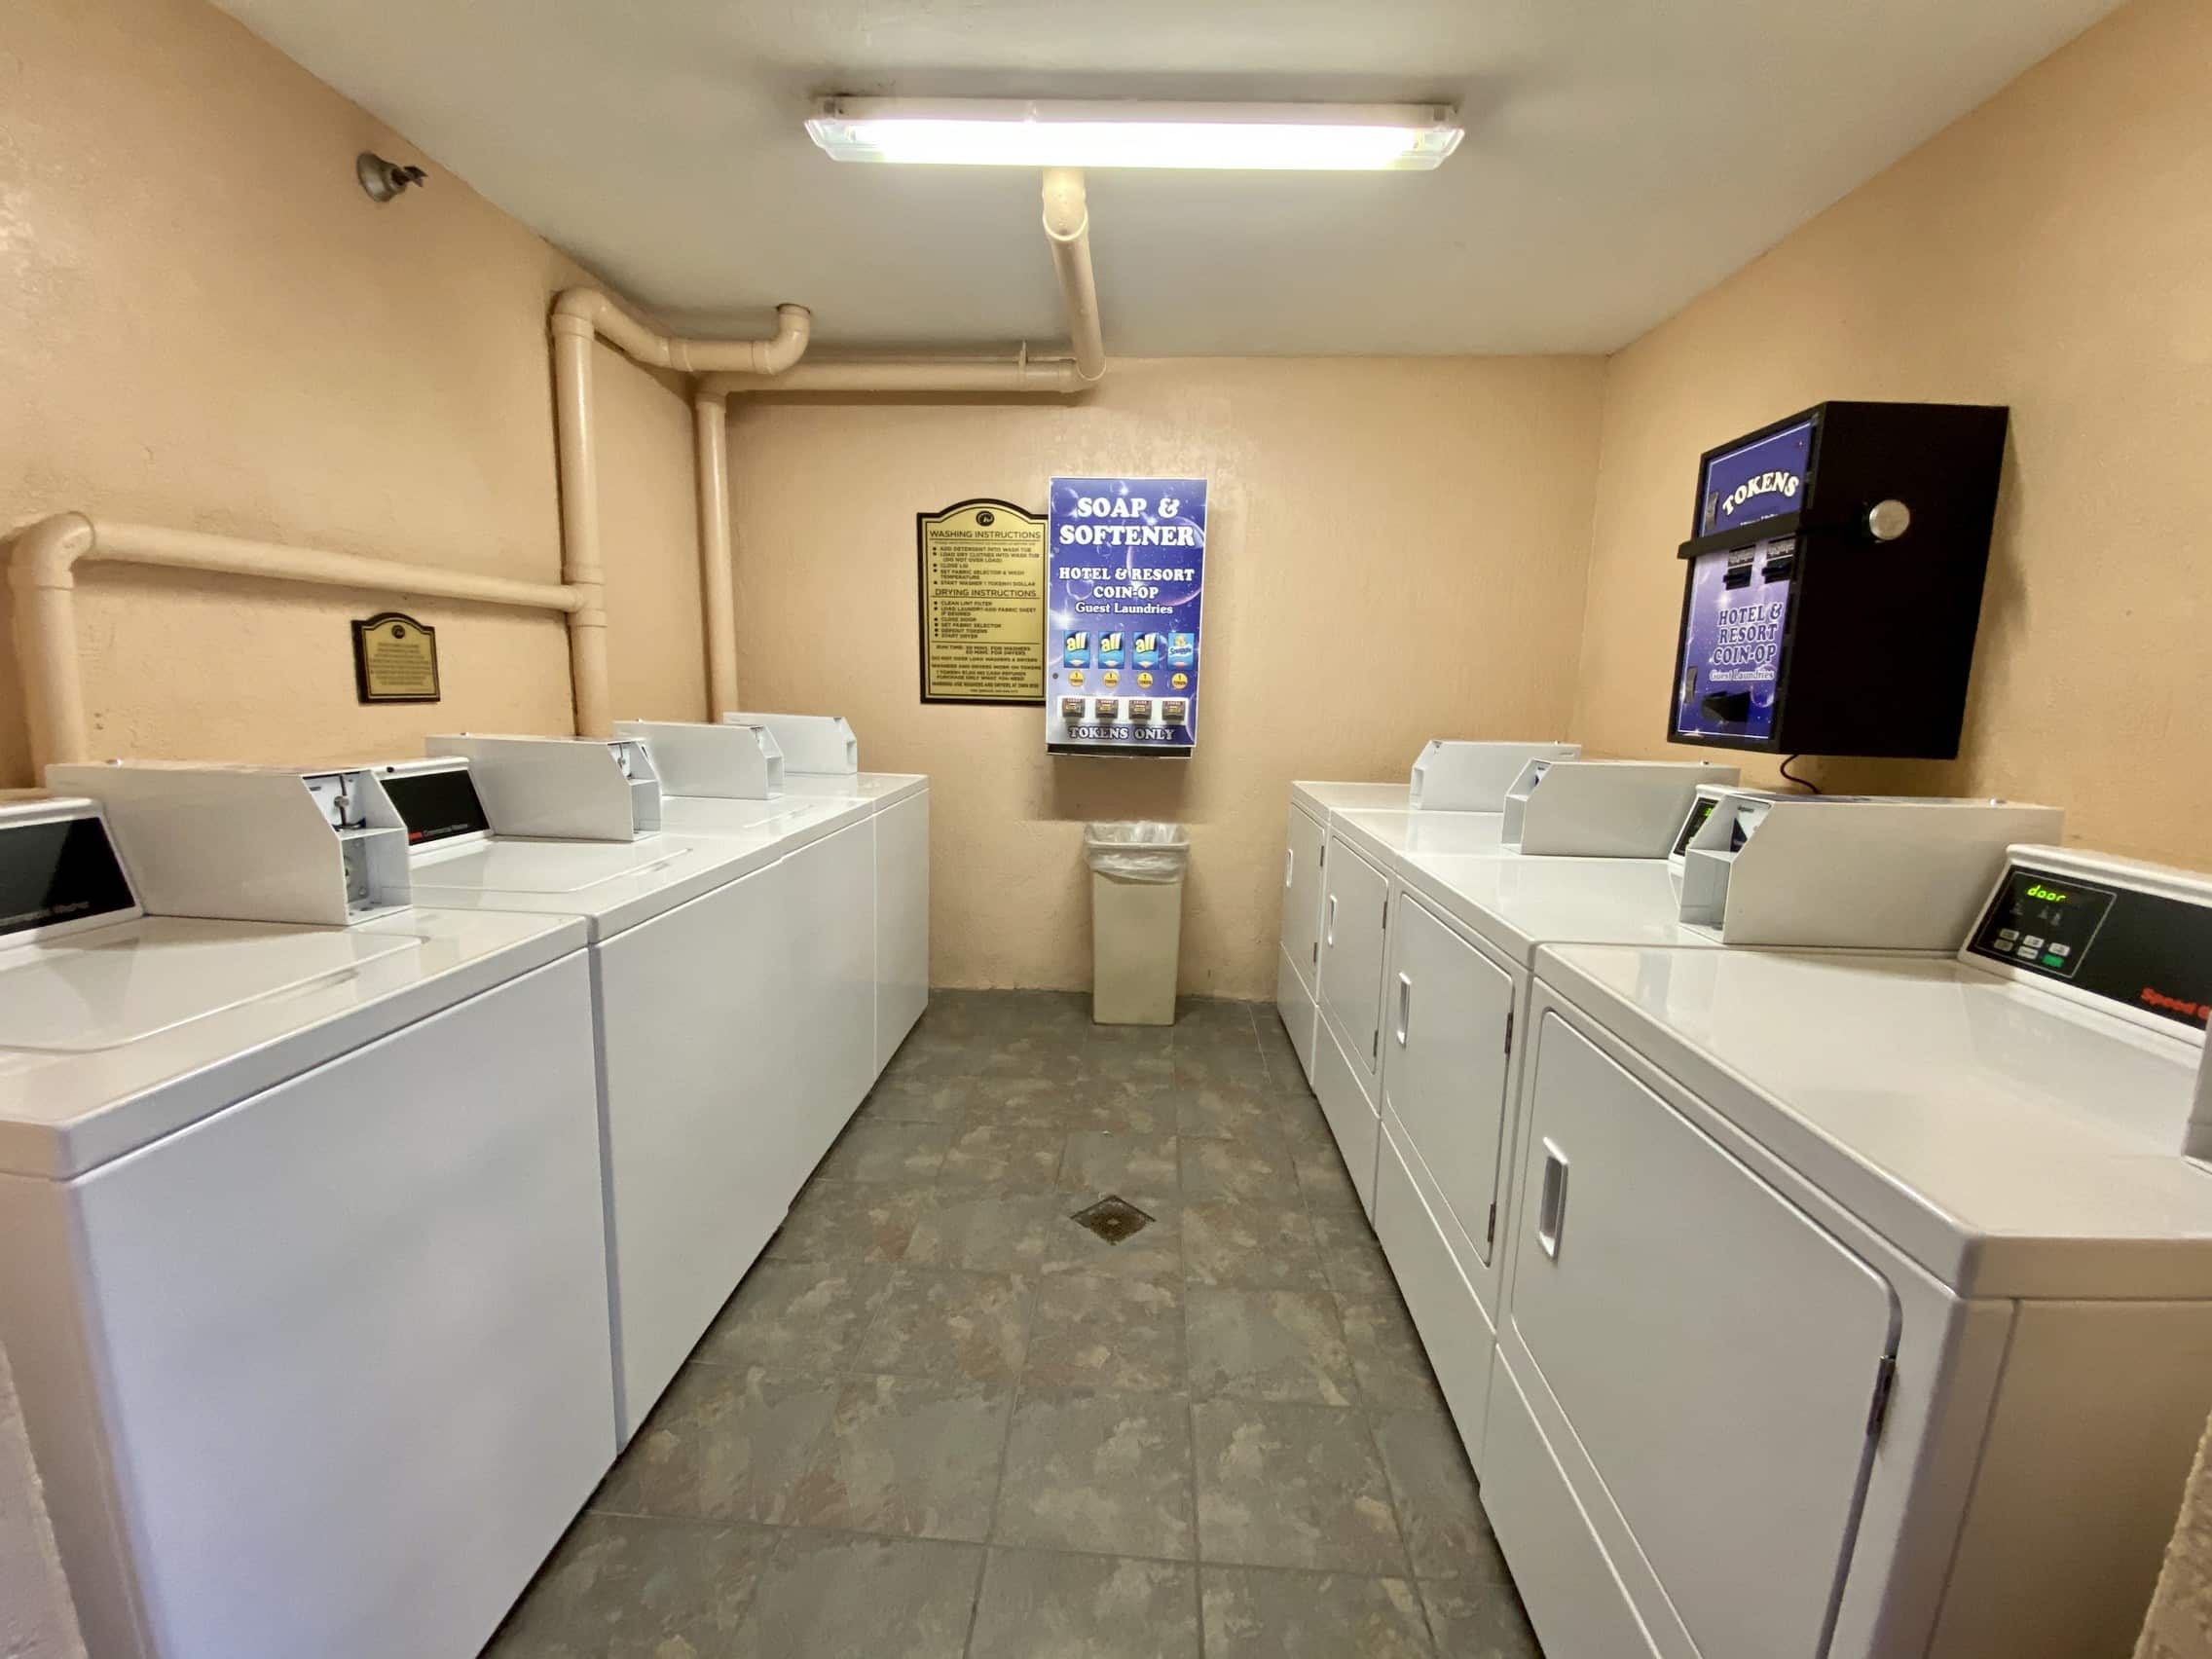 Rosen Inn Pointe Prlando Self-service laundry facilities and dry cleaning